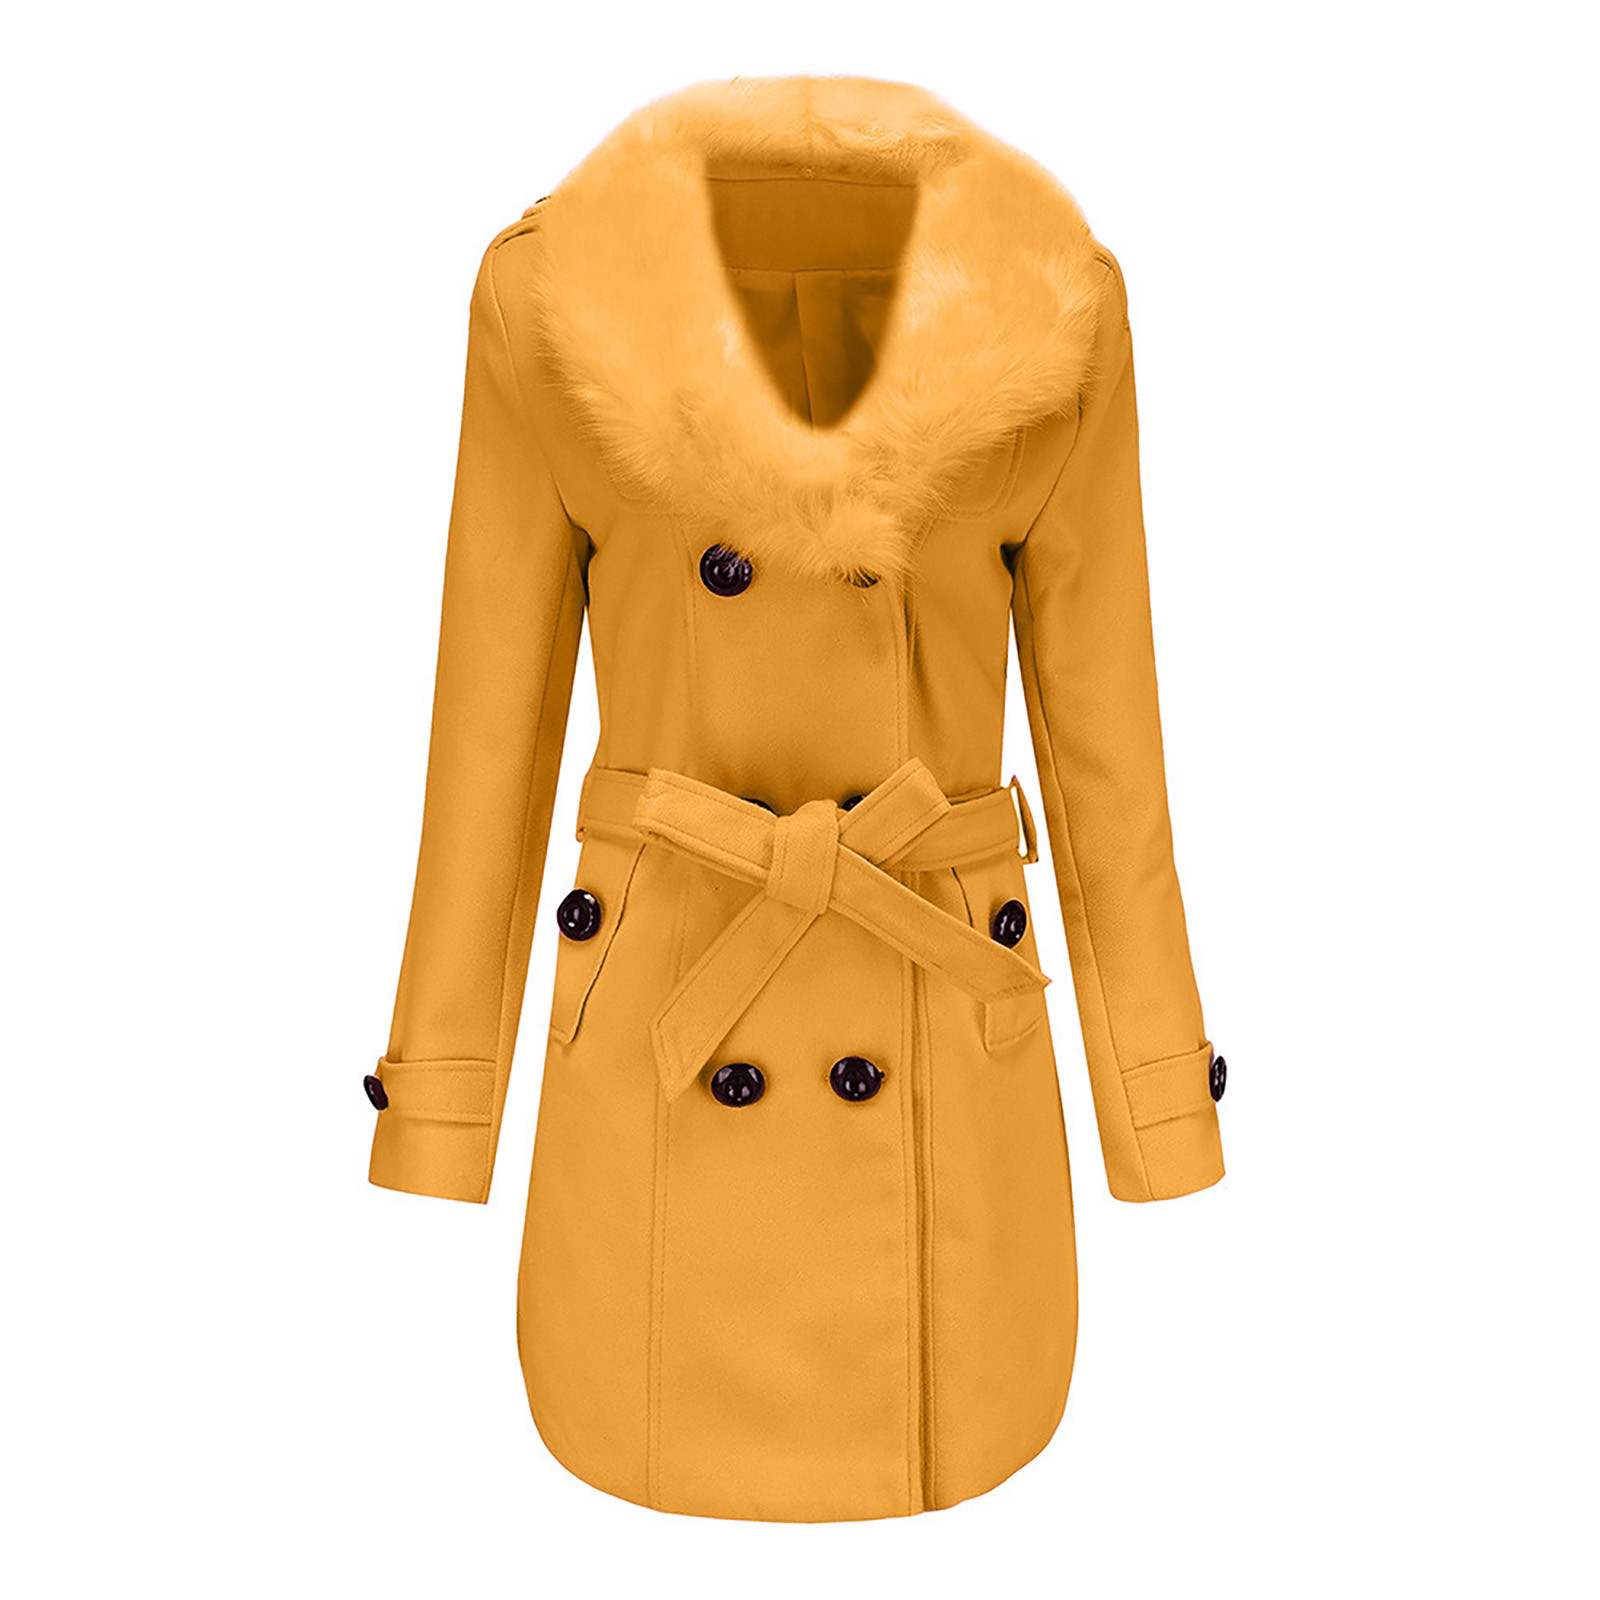 jsaierl Womens Trench Coat Elegant Faux Fur Lapel Collar Double Breasted  Long Sleeve Fall Winter Wool Blend Pea Coat with Belt